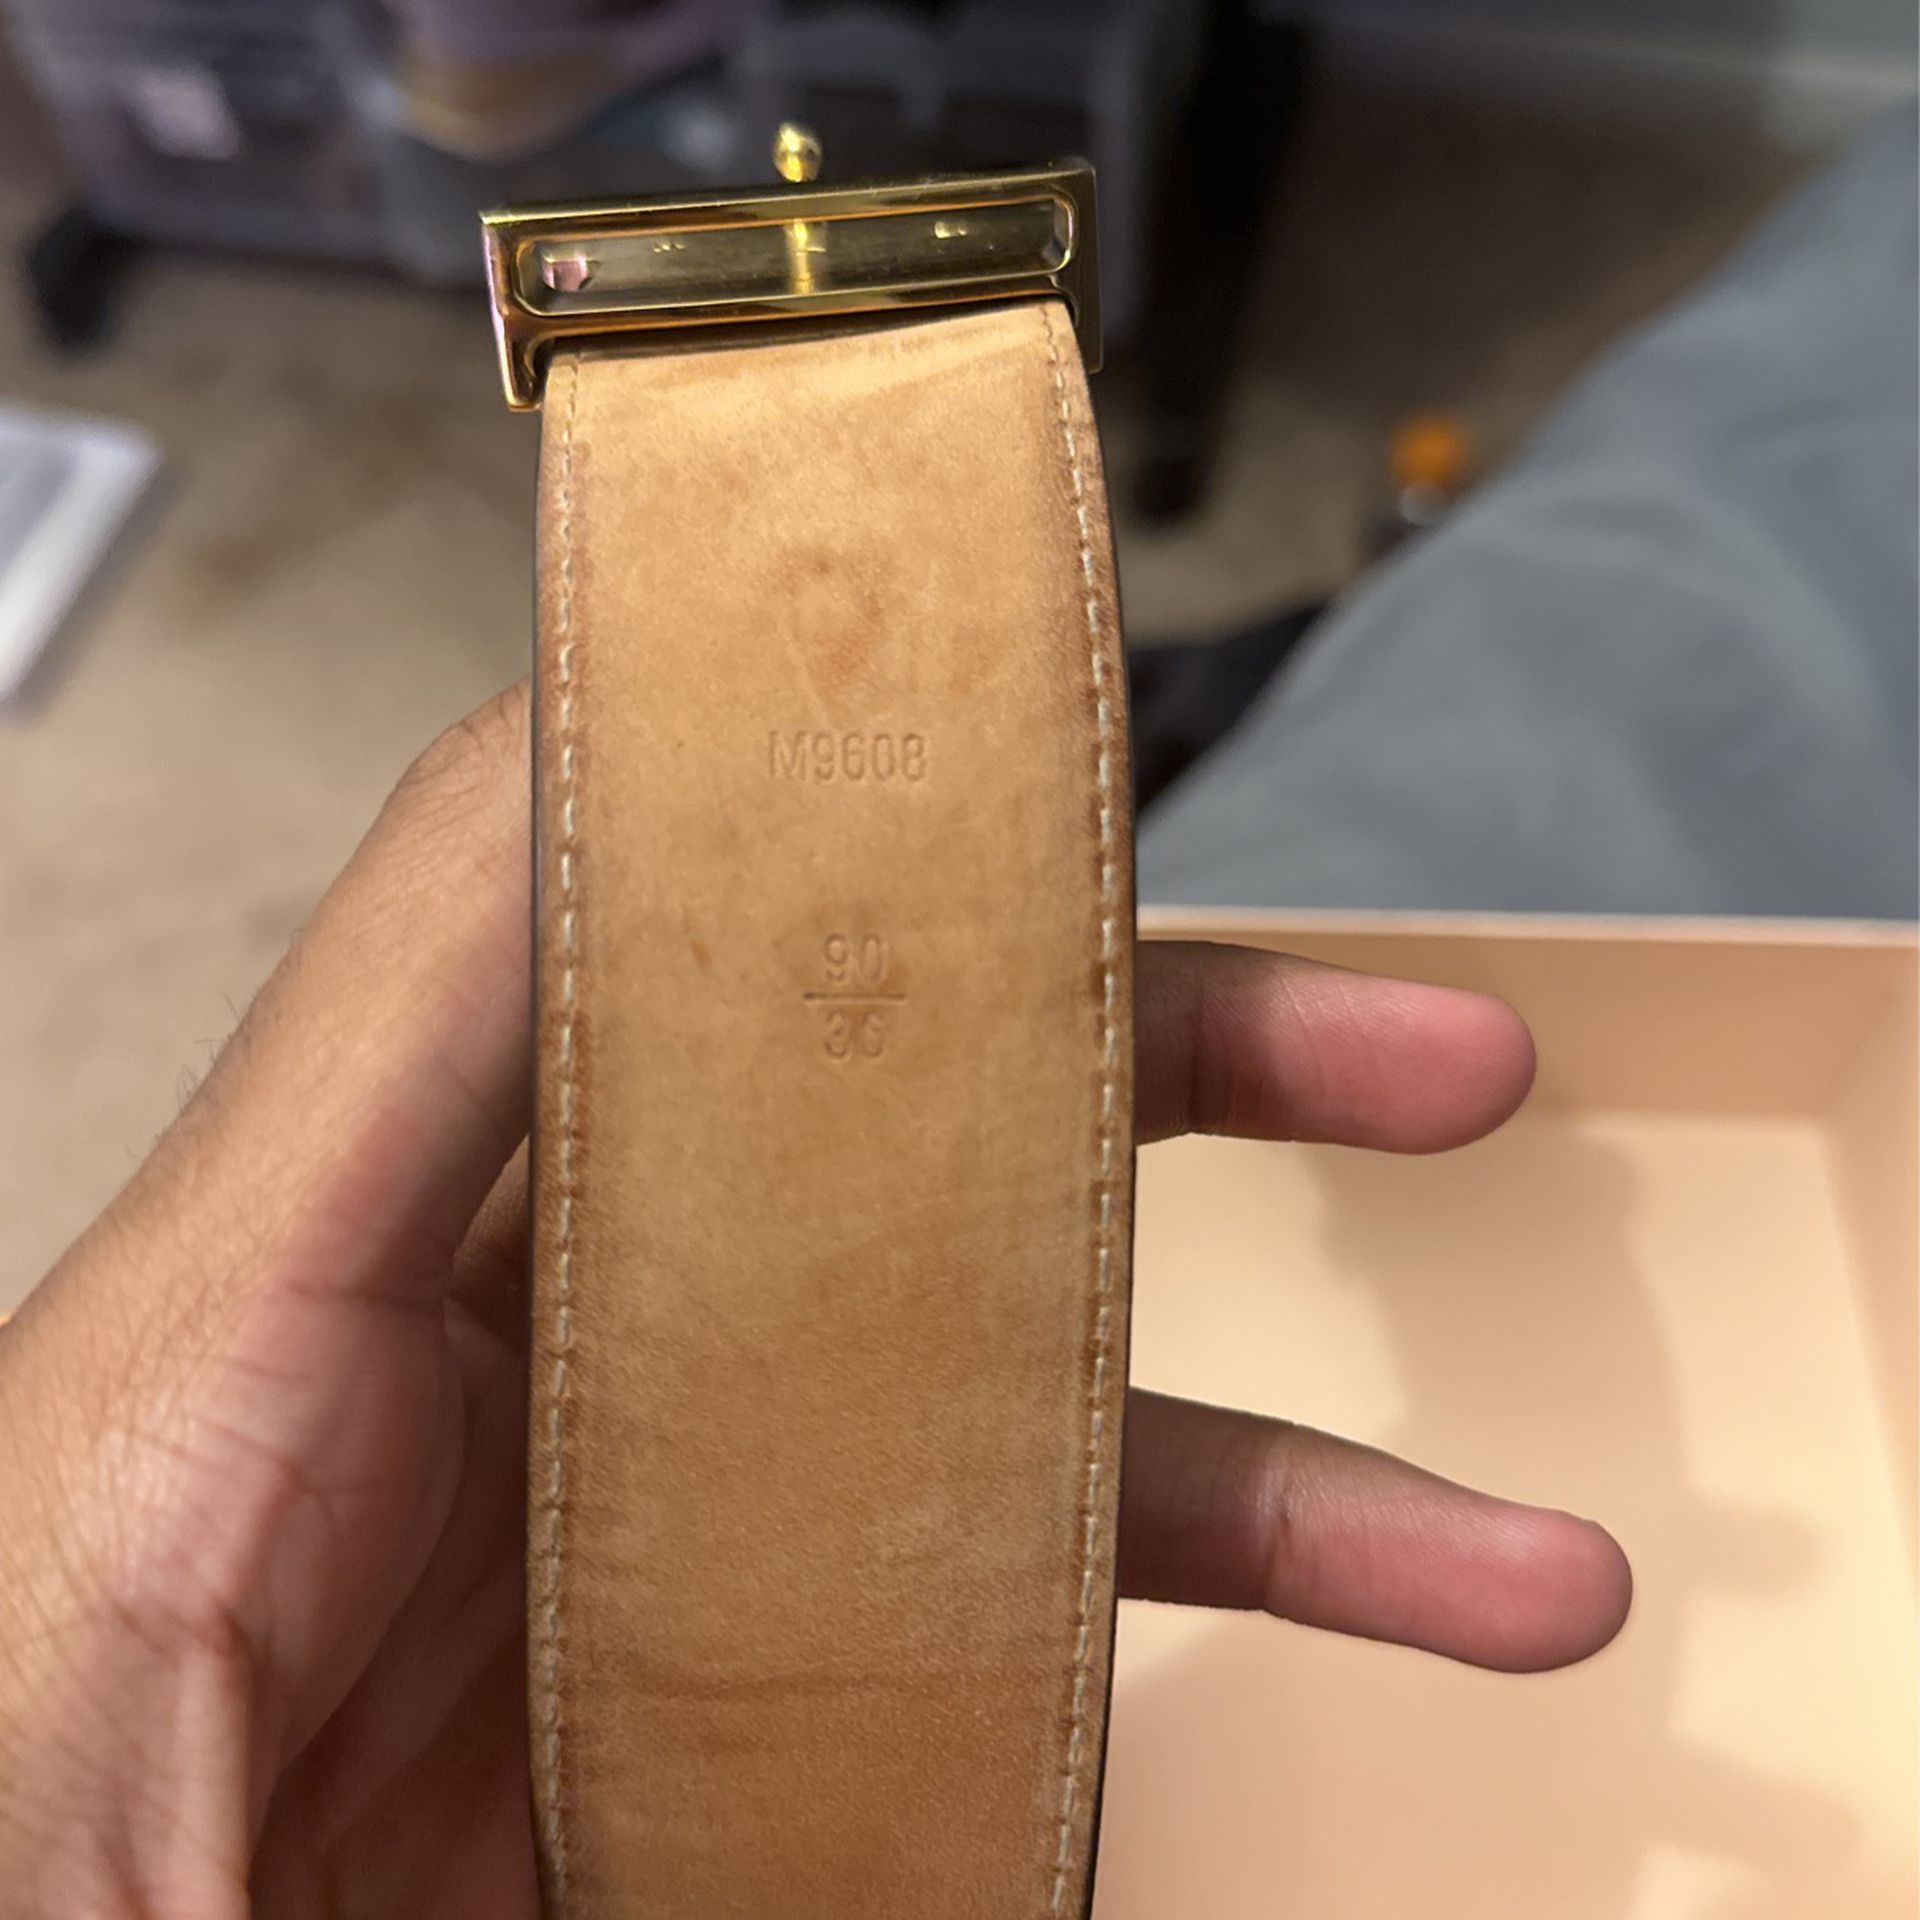 Gucci And Louis Vuitton Belt for Sale in Taylor, MI - OfferUp